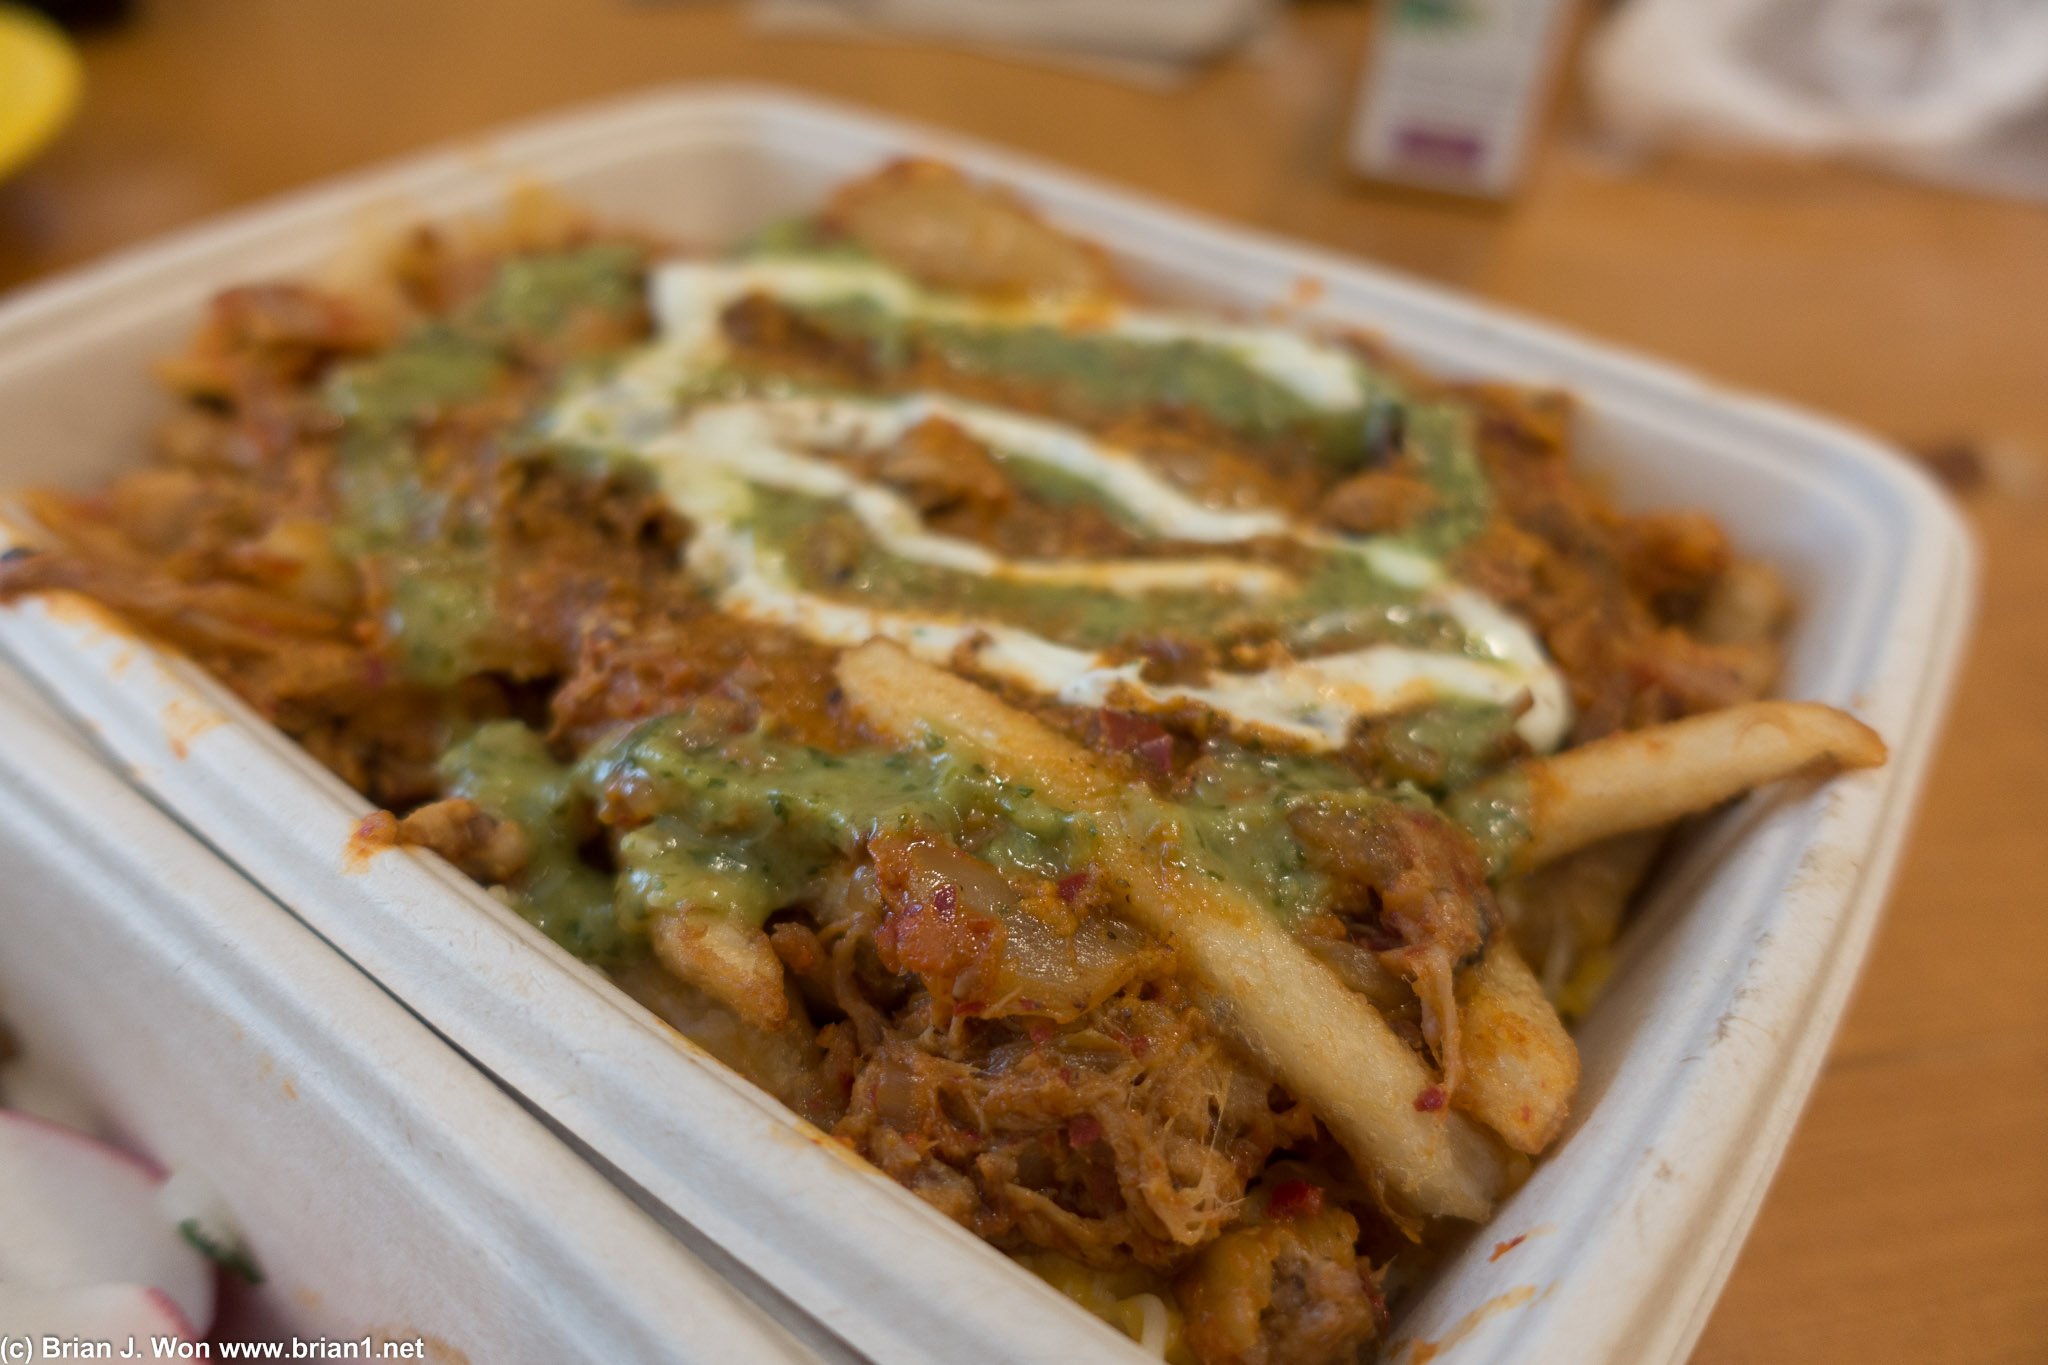 Loaded fries. Extra fries.